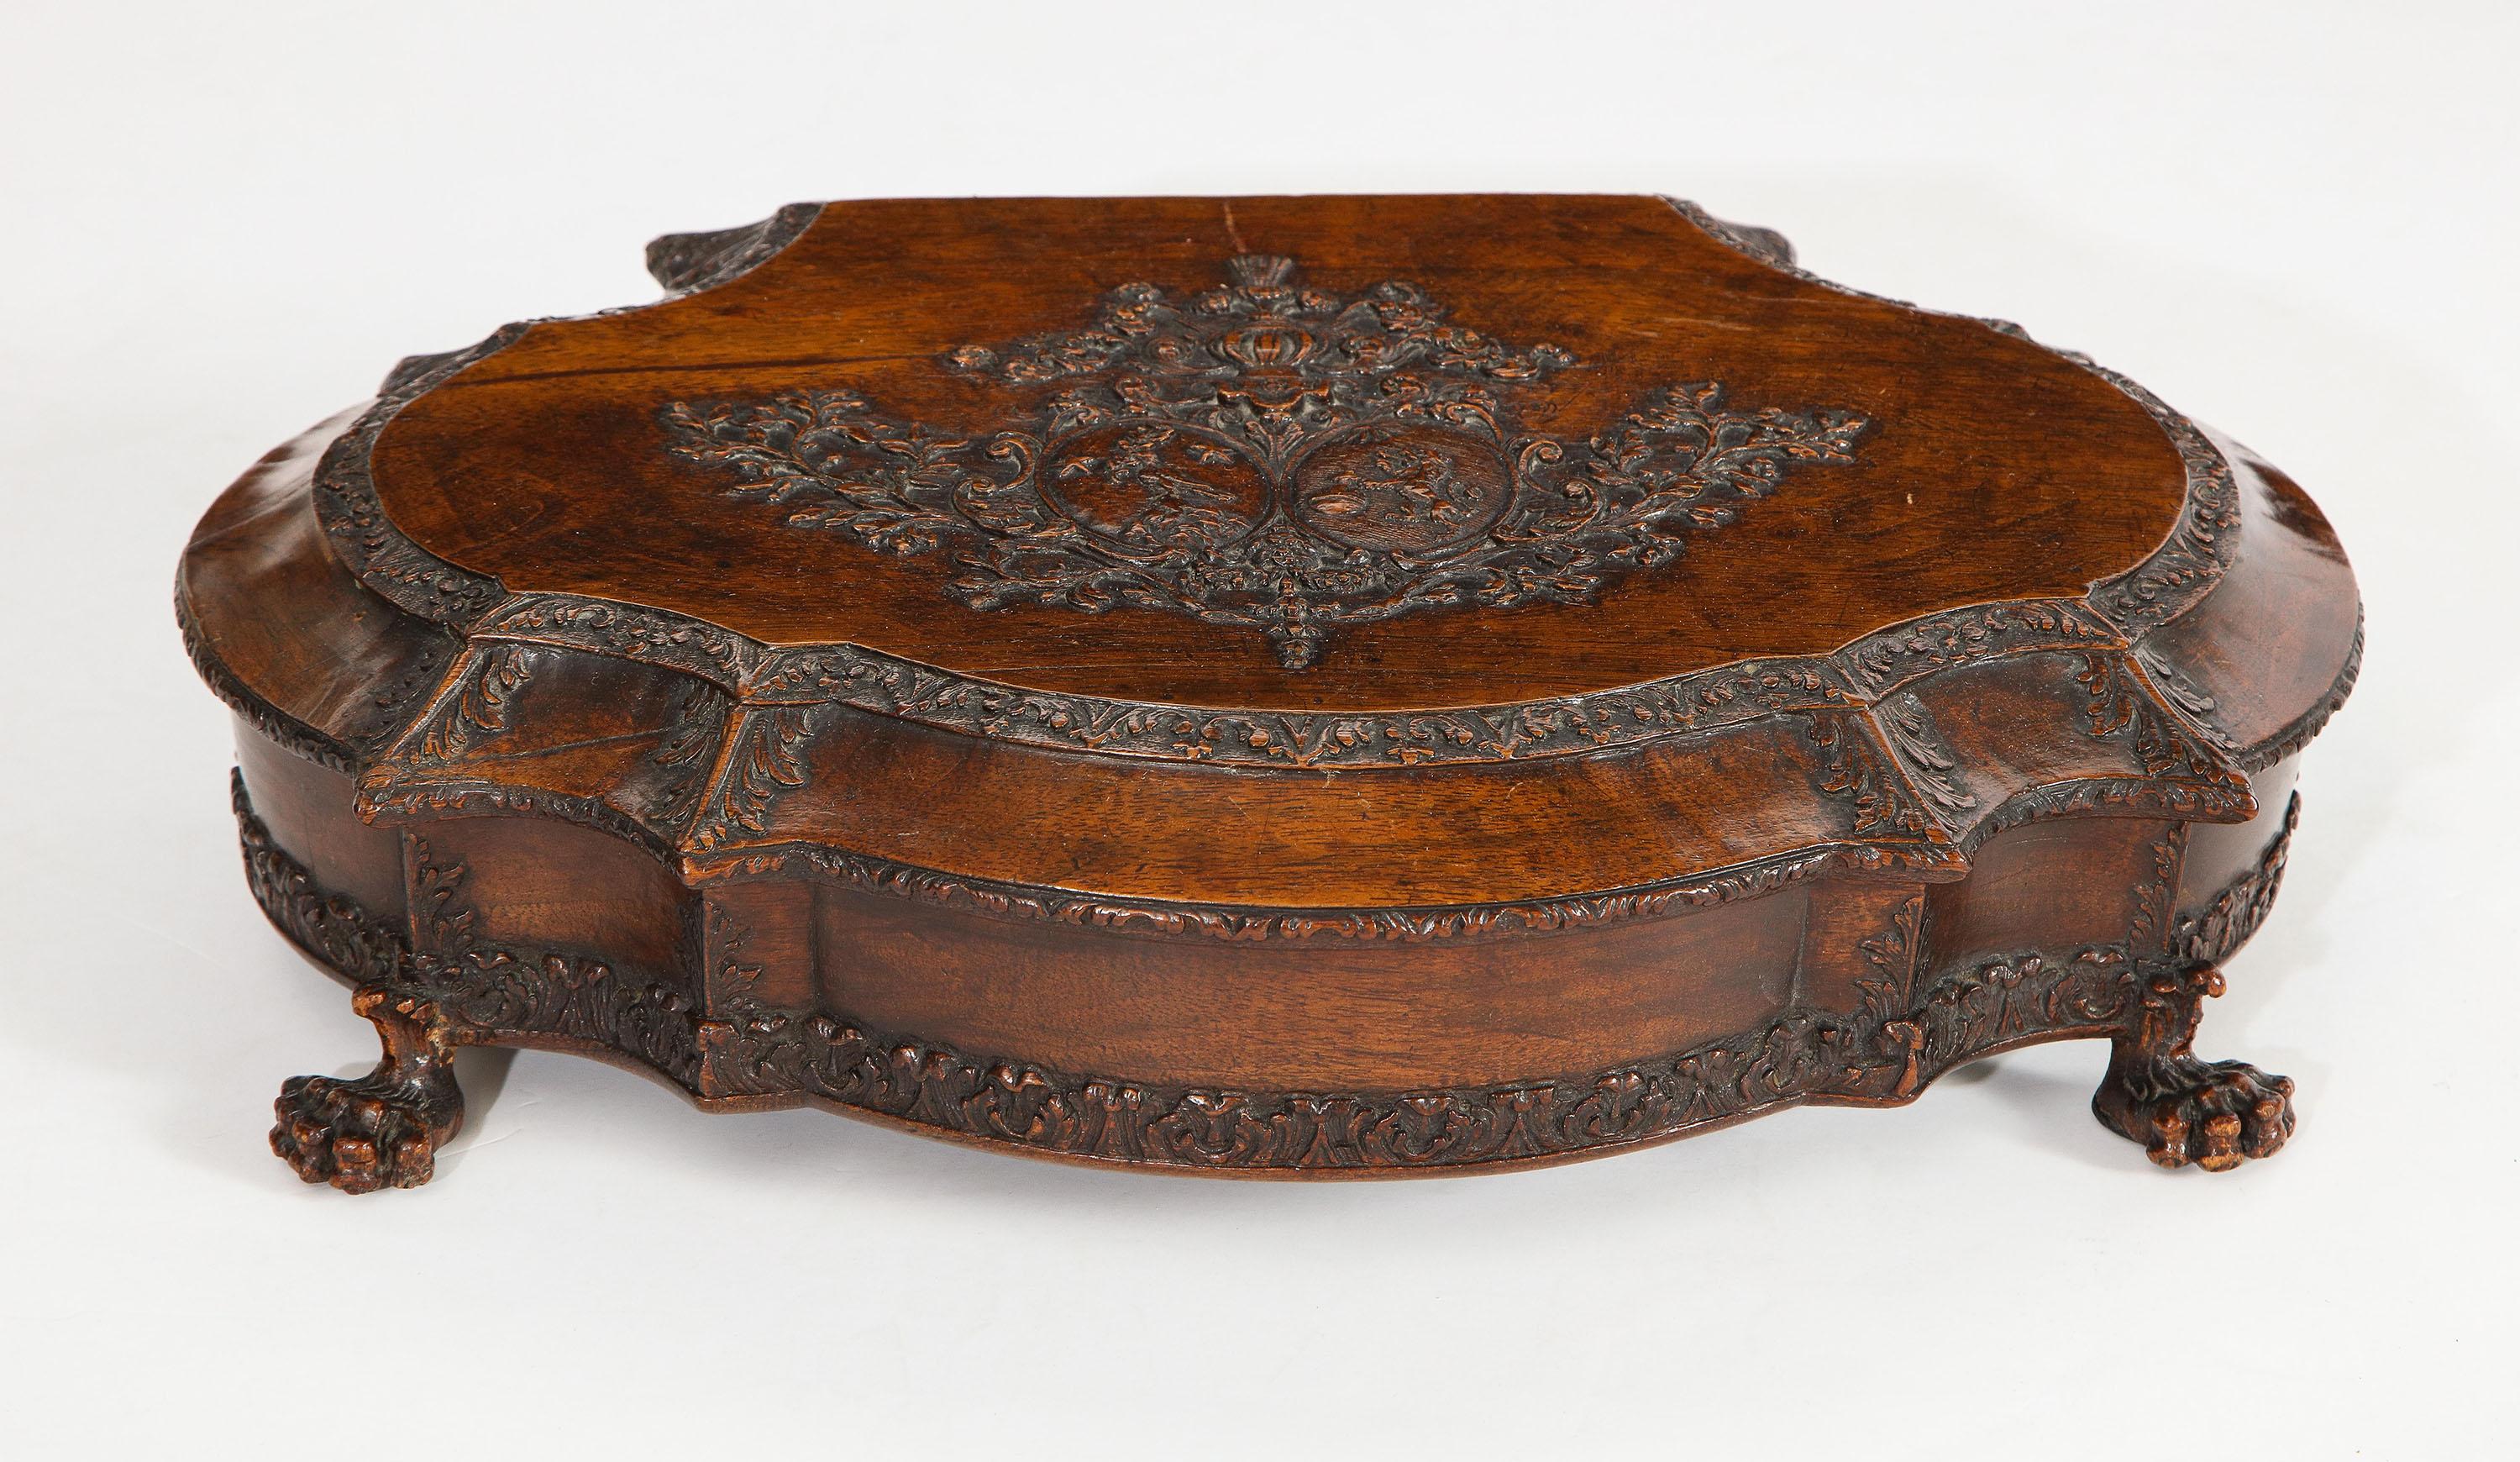 The elaborate ovoid form walnut box with lid showing royal coat of arms carved in relief, acanthus leaves at stylized points and opens to reveal an incised design on cover, all on paw feet